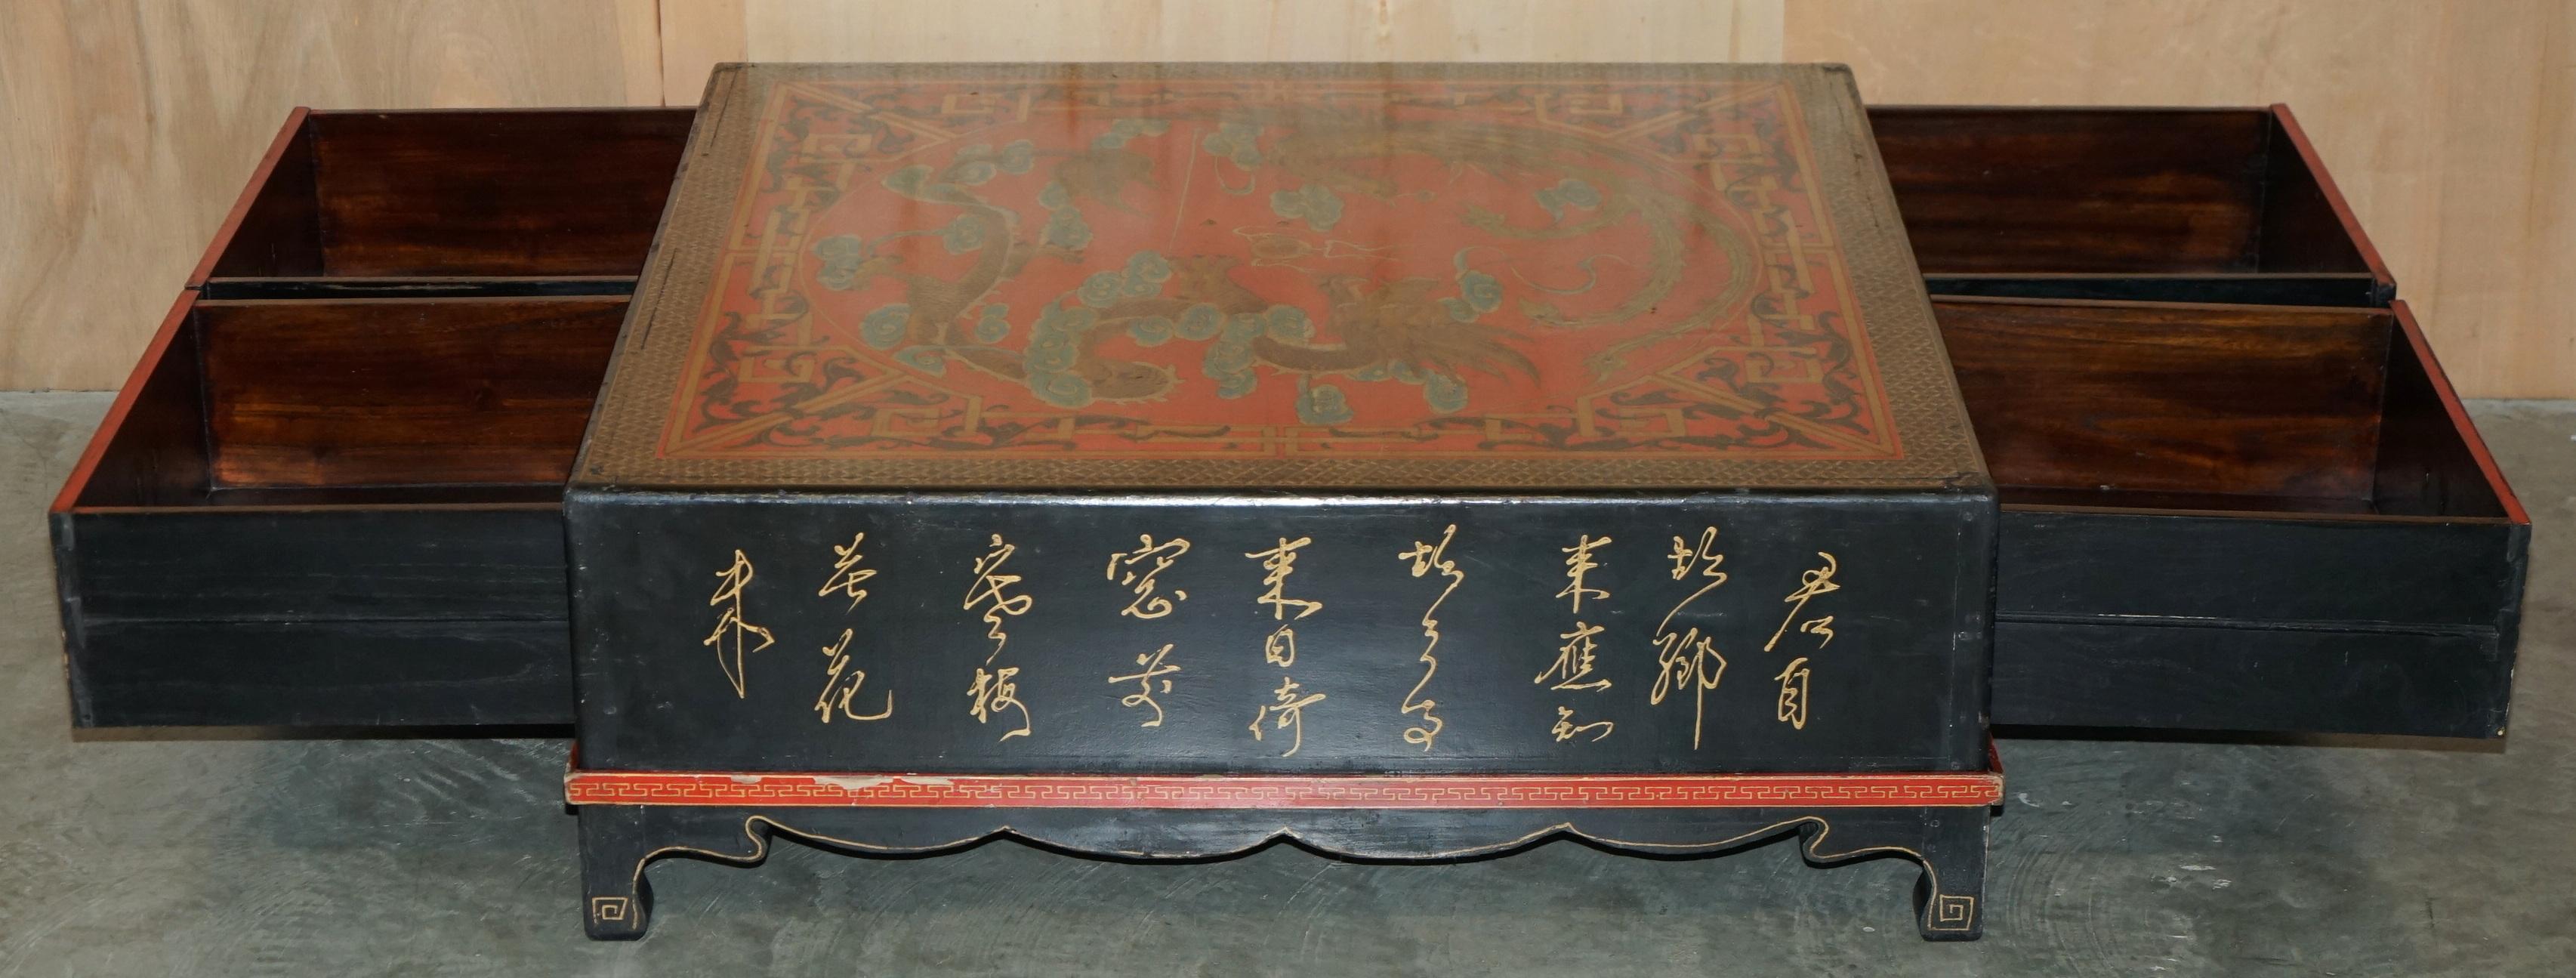 LARGE ANTIQUE CIRCA 1920 CHiNESE DRAGON CHINOISERIE EXPORT COFFEE TABLE DRAWERS For Sale 10